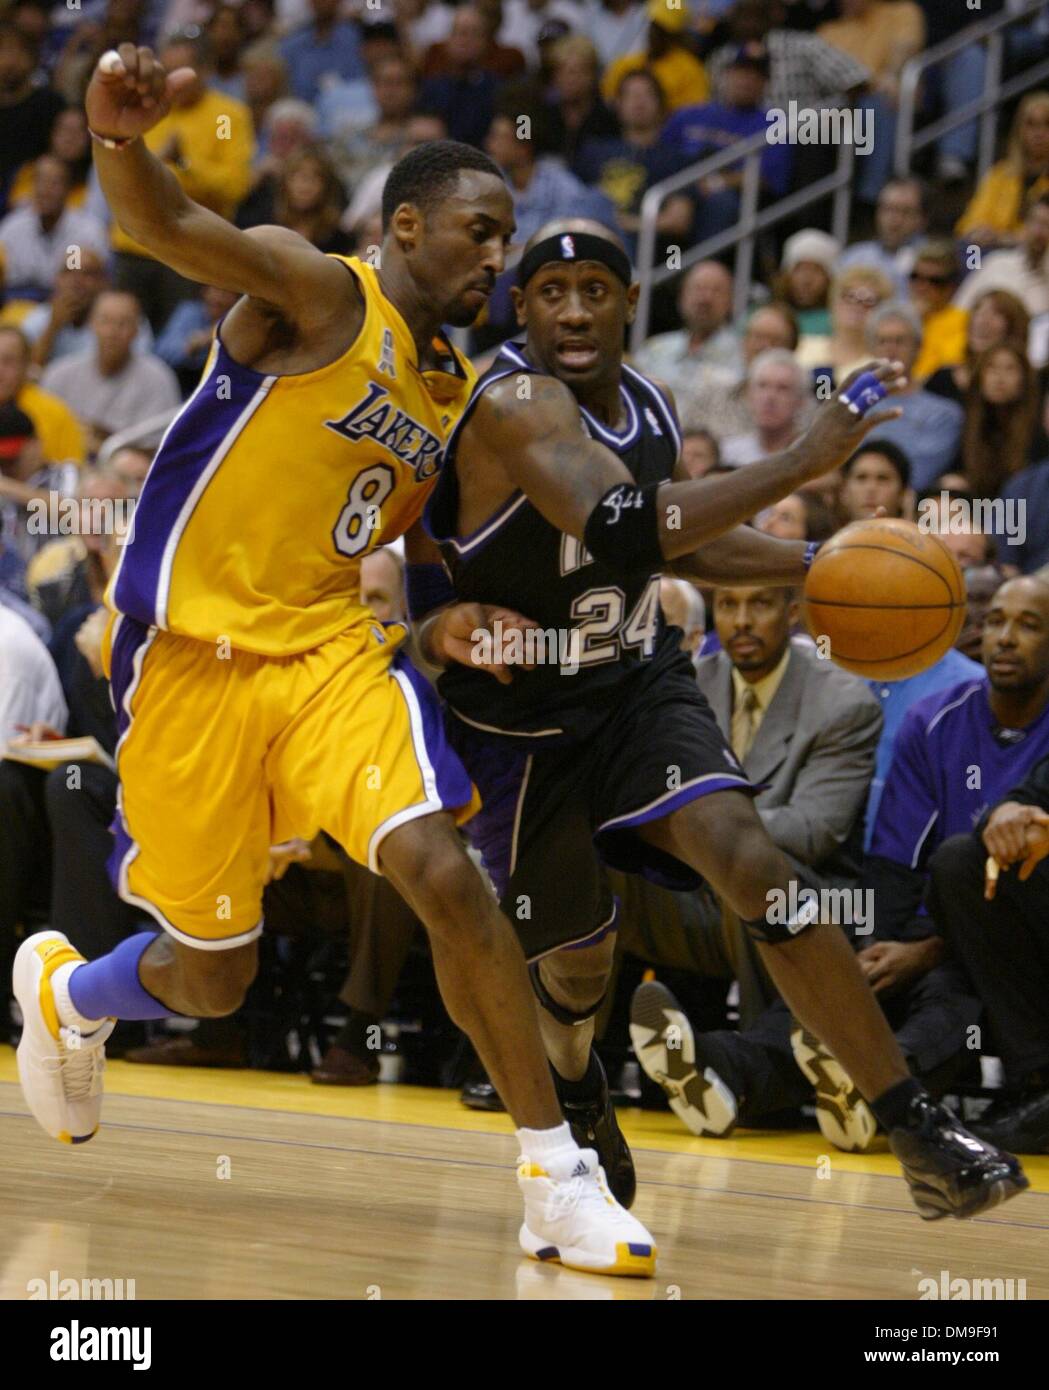 Bobby Jackson drives against Kobe Bryant in the second quarter in game four between the Sacramento Kings and the Los Angeles Lakers in the Western Conference Championships Sunday, May 26, 2002 at Staples Center. Sacramento Bee photograph by Bryan Patrick/ZUMA Press Stock Photo